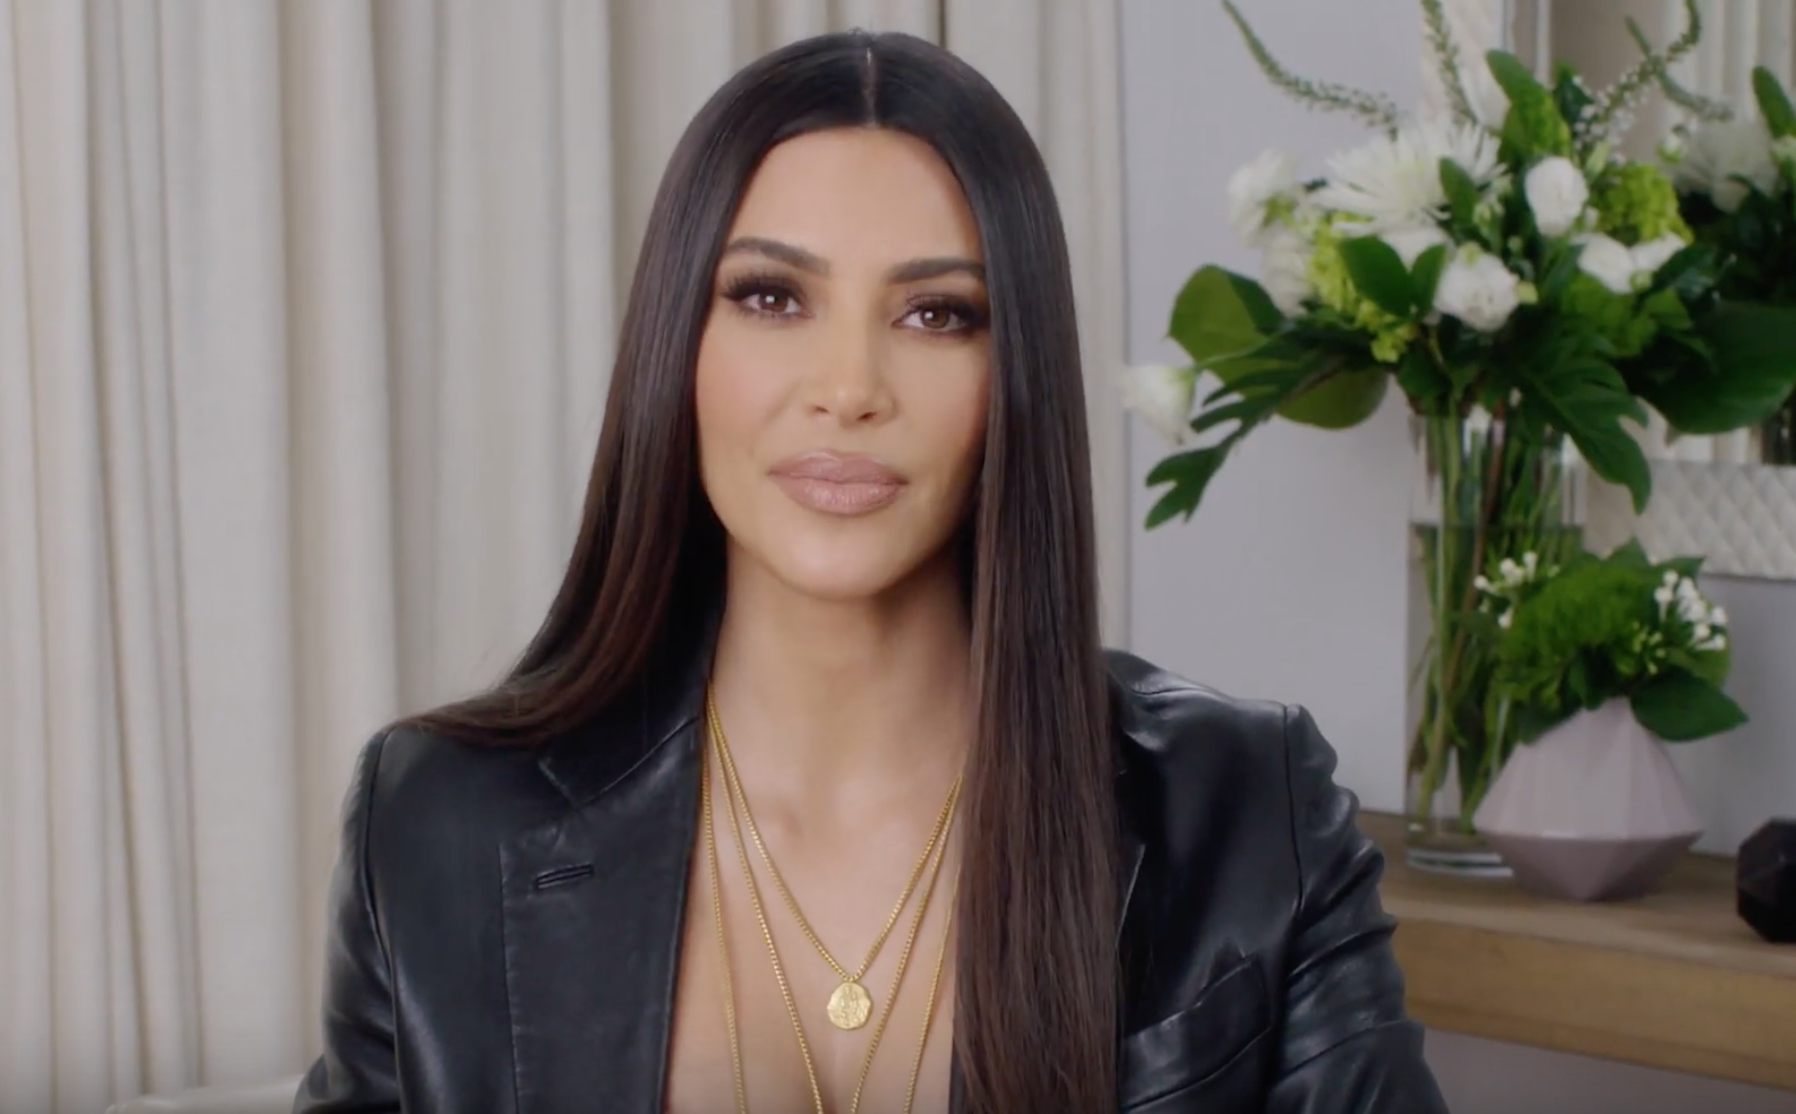 Kim Kardashian says she 'cried all the way home' after being